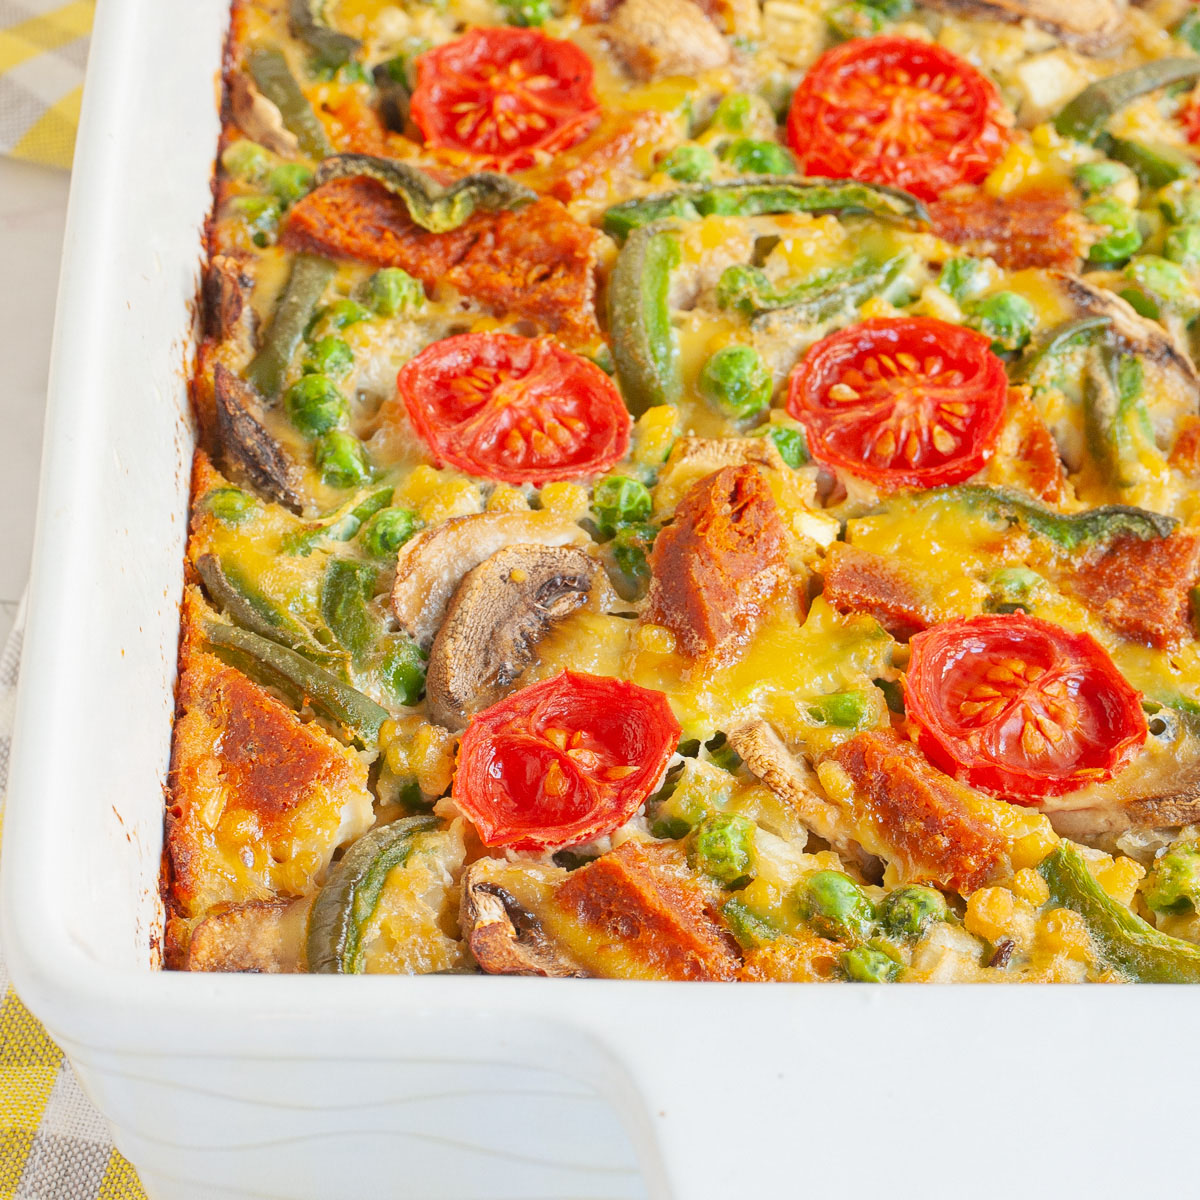 Cherry tomatoes, mushroom slices, bell pepper slices on top of a yellow cake-like dough is in a white casserole dish.